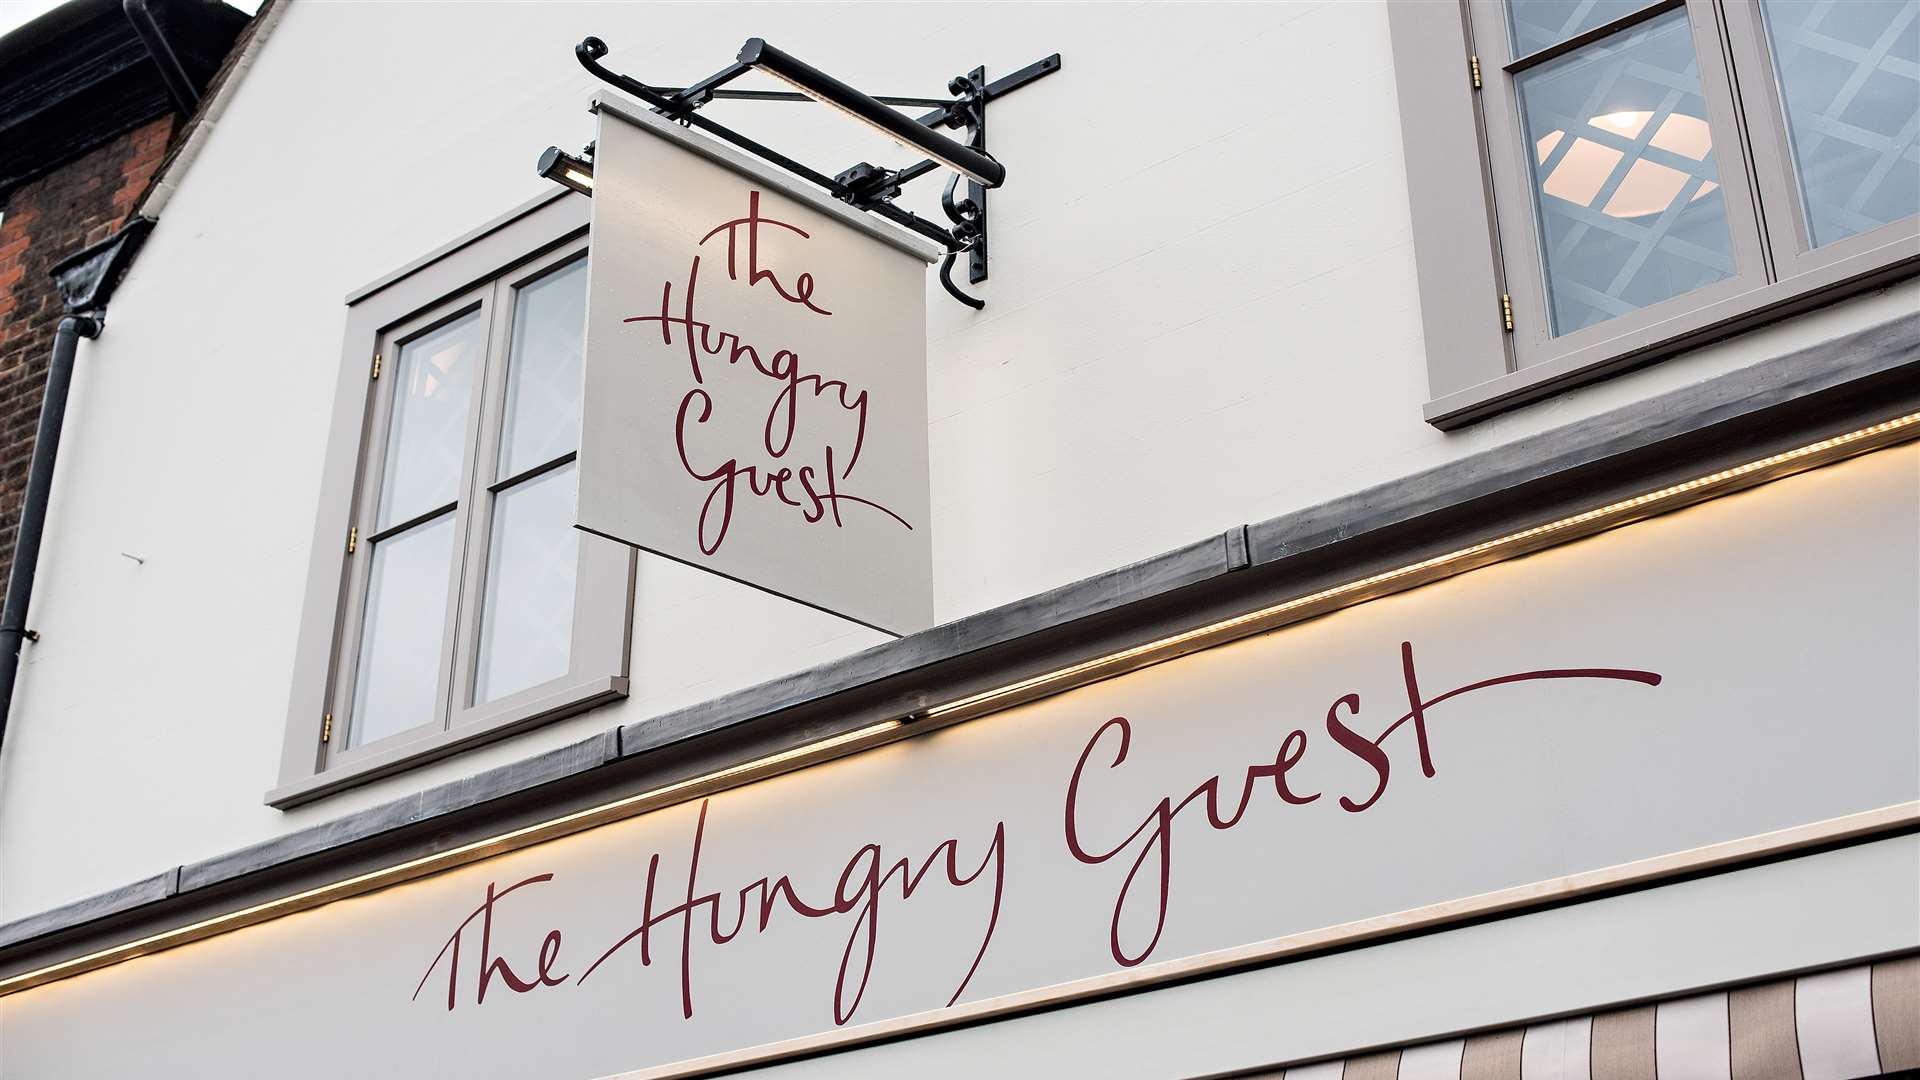 The Hungry Guest in West Malling has undergone months of restoration work